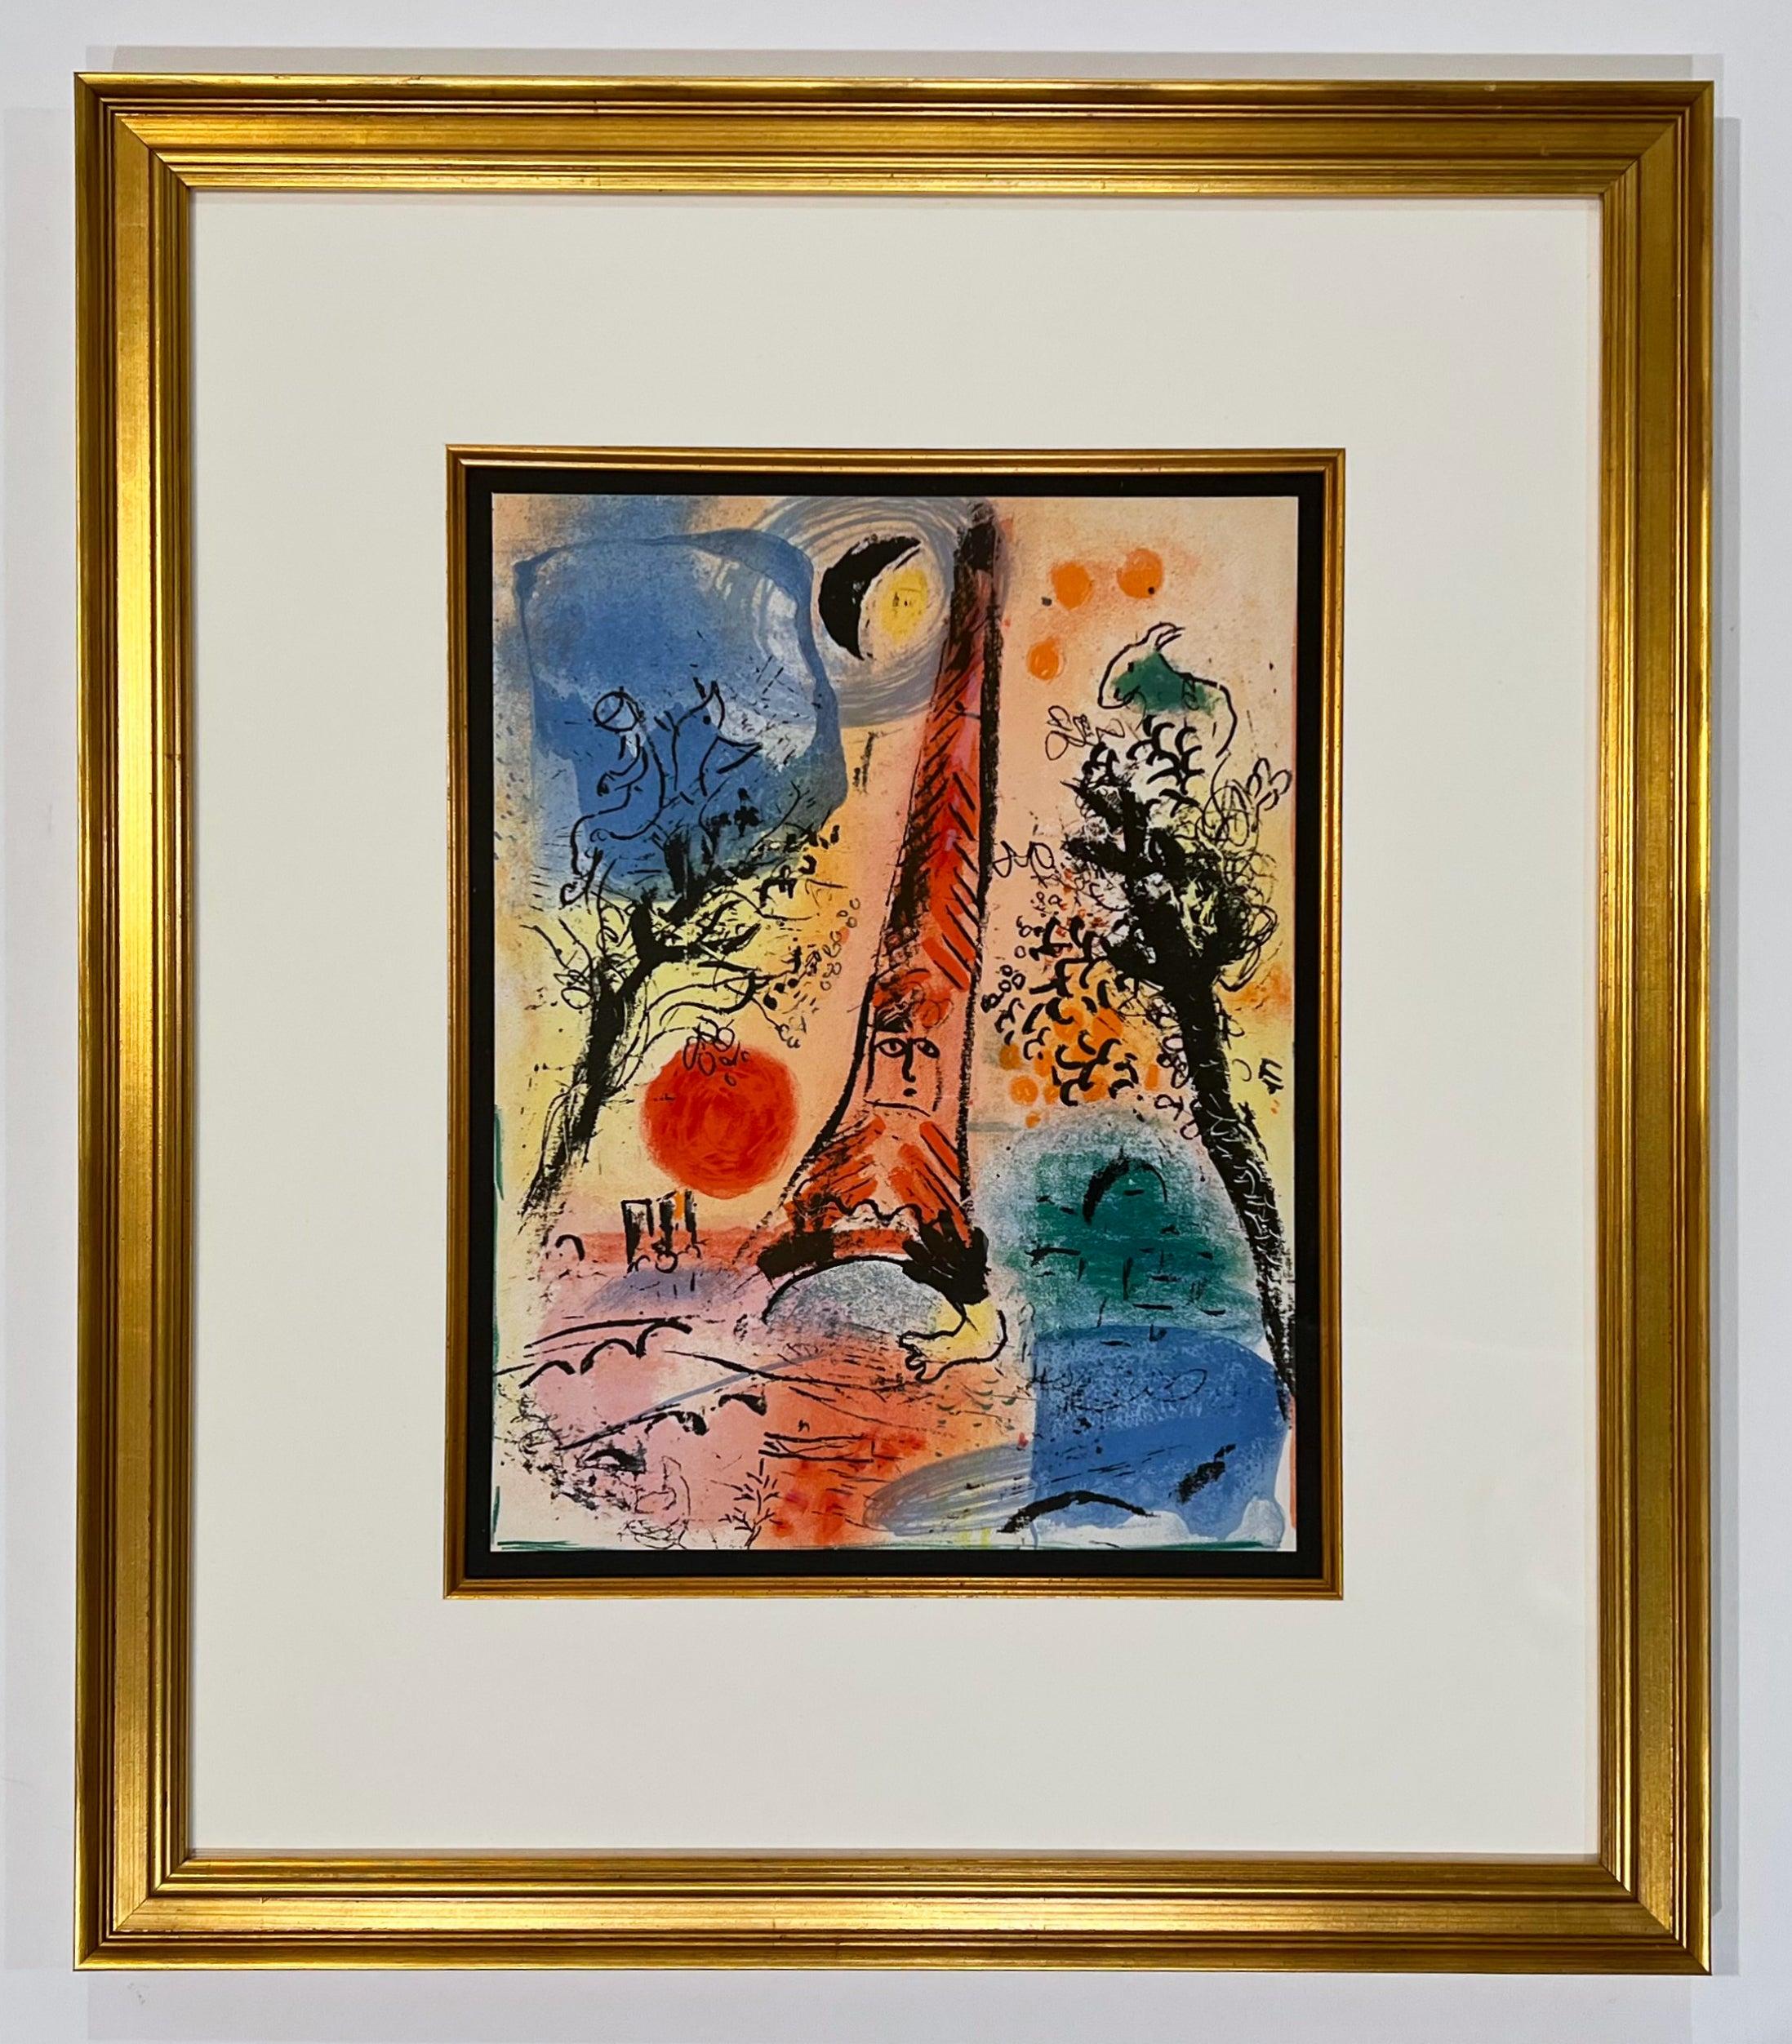 Vision of Paris, Lithograph from Mourlot Lithographe I - Print by Marc Chagall